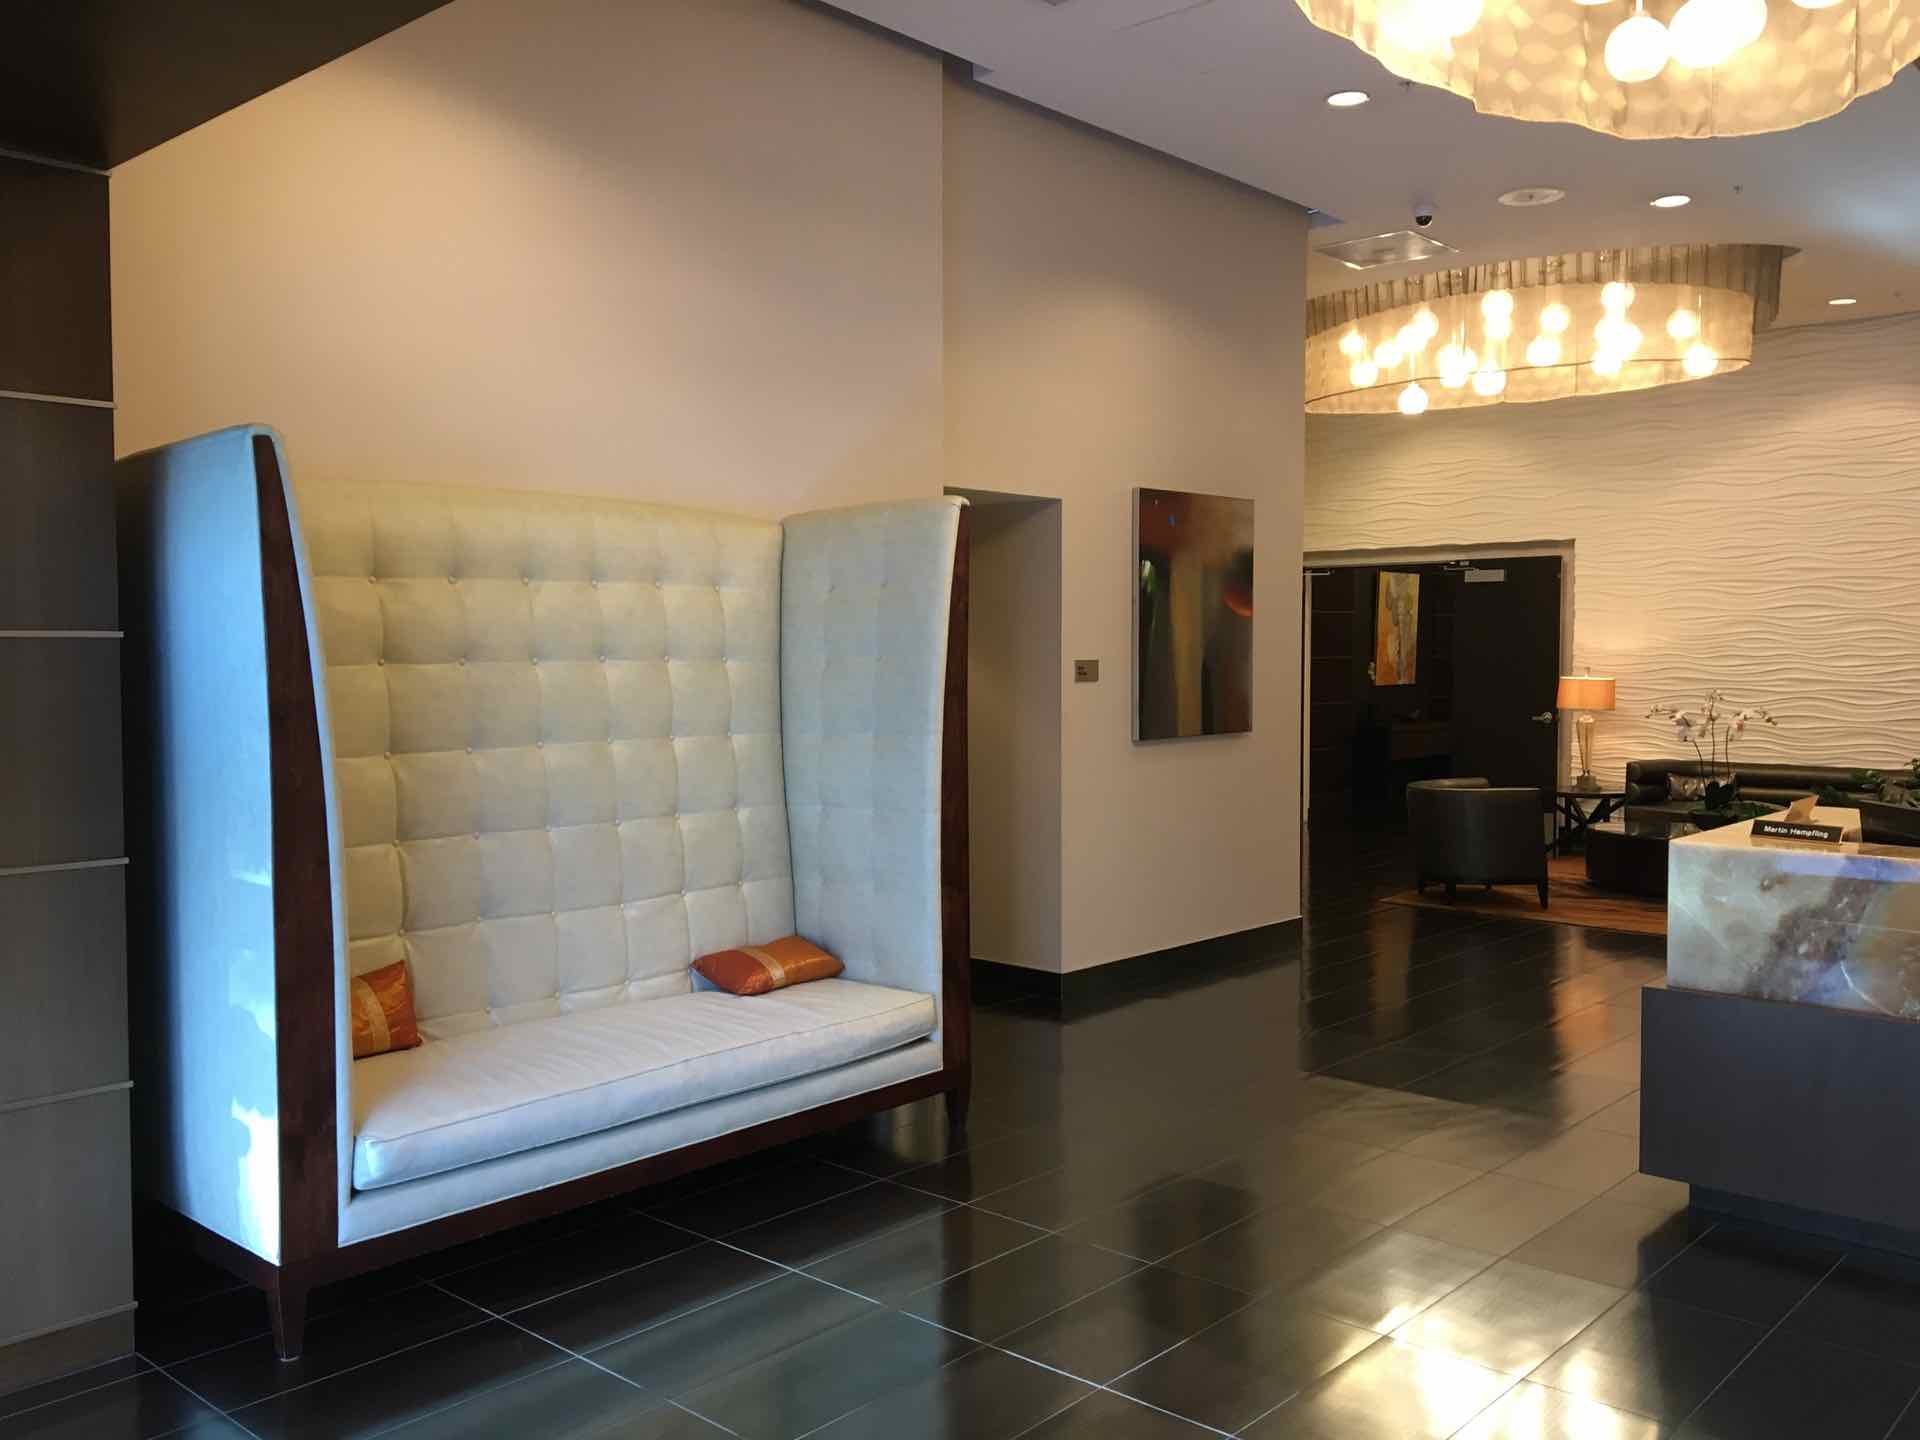 Seating area located in lobby